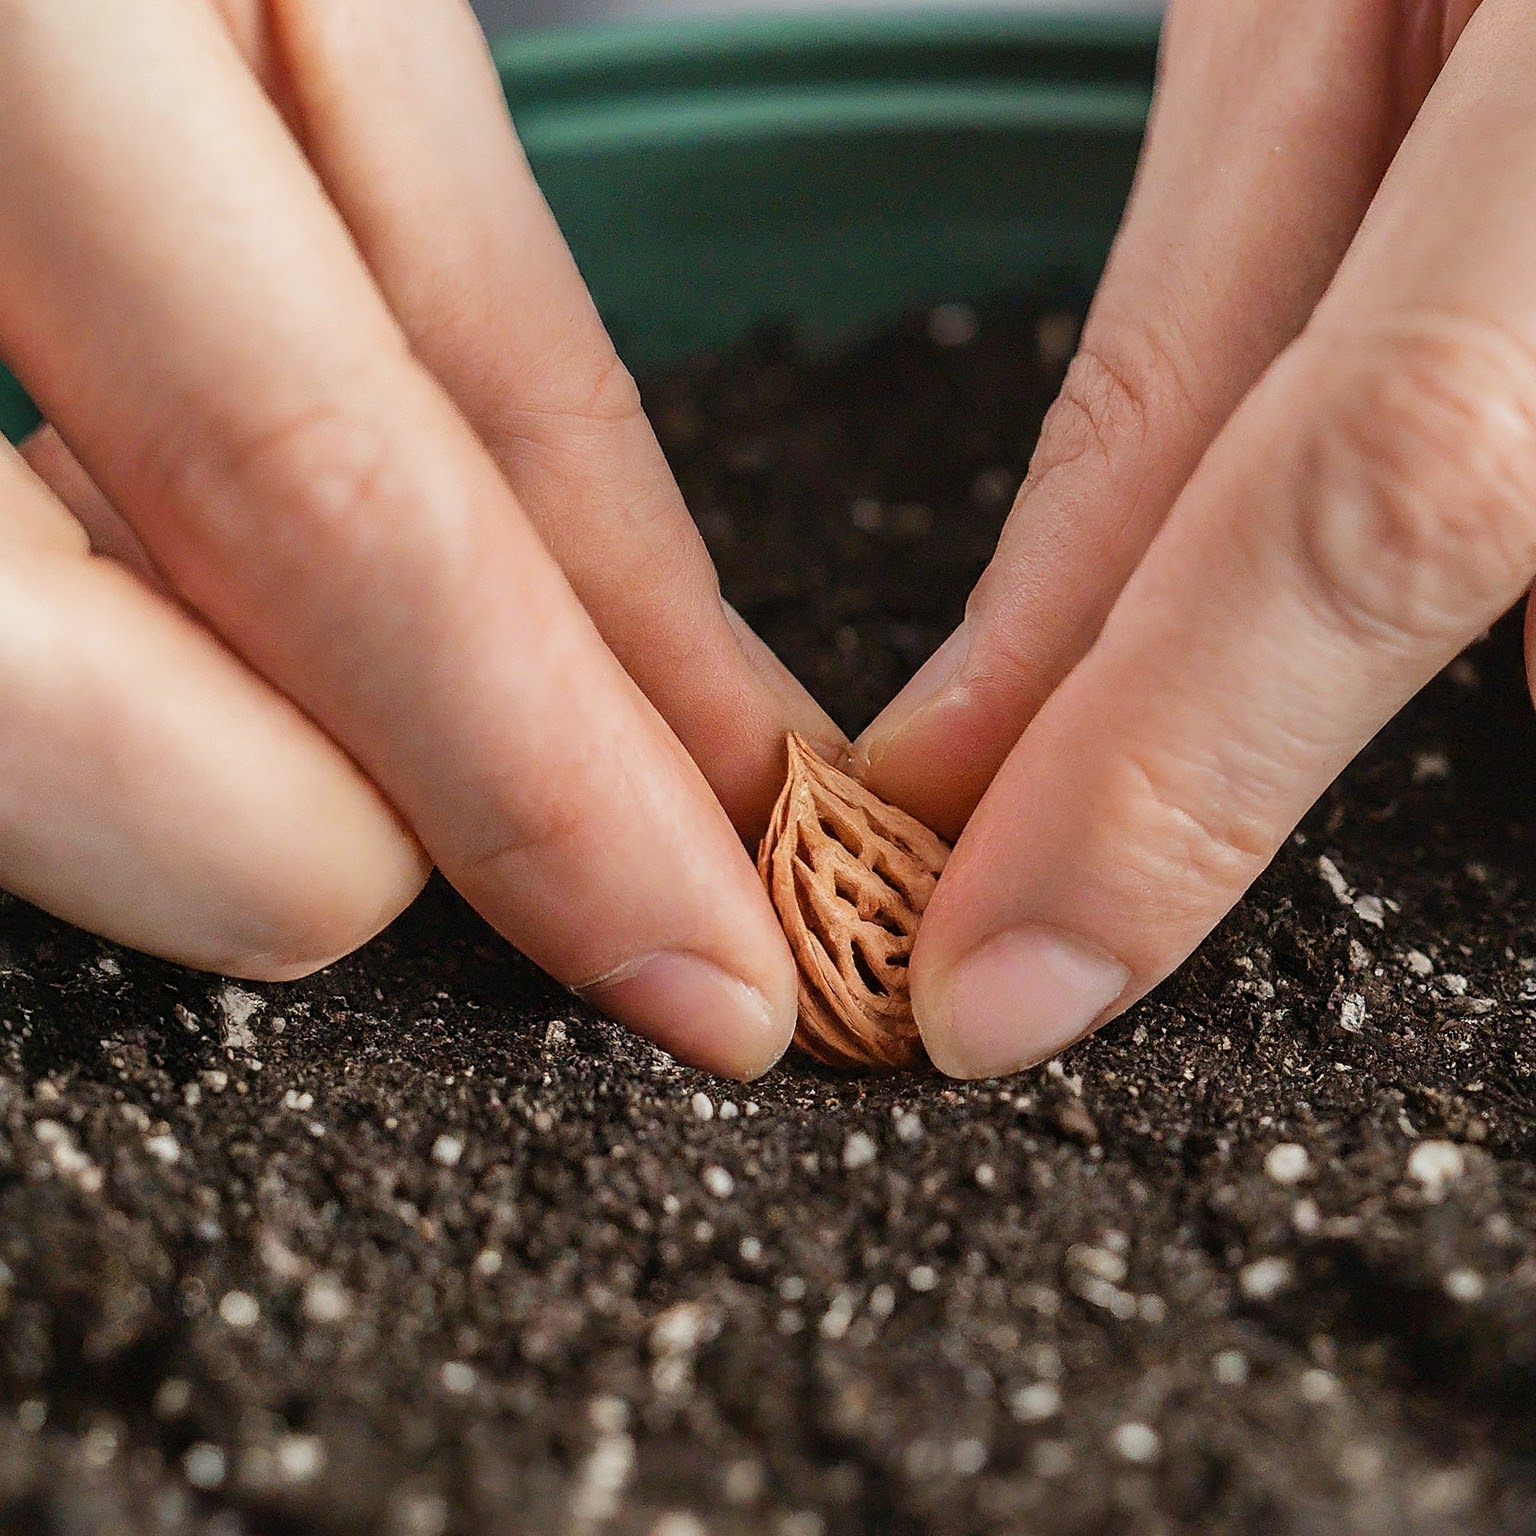 how to plant peach seed